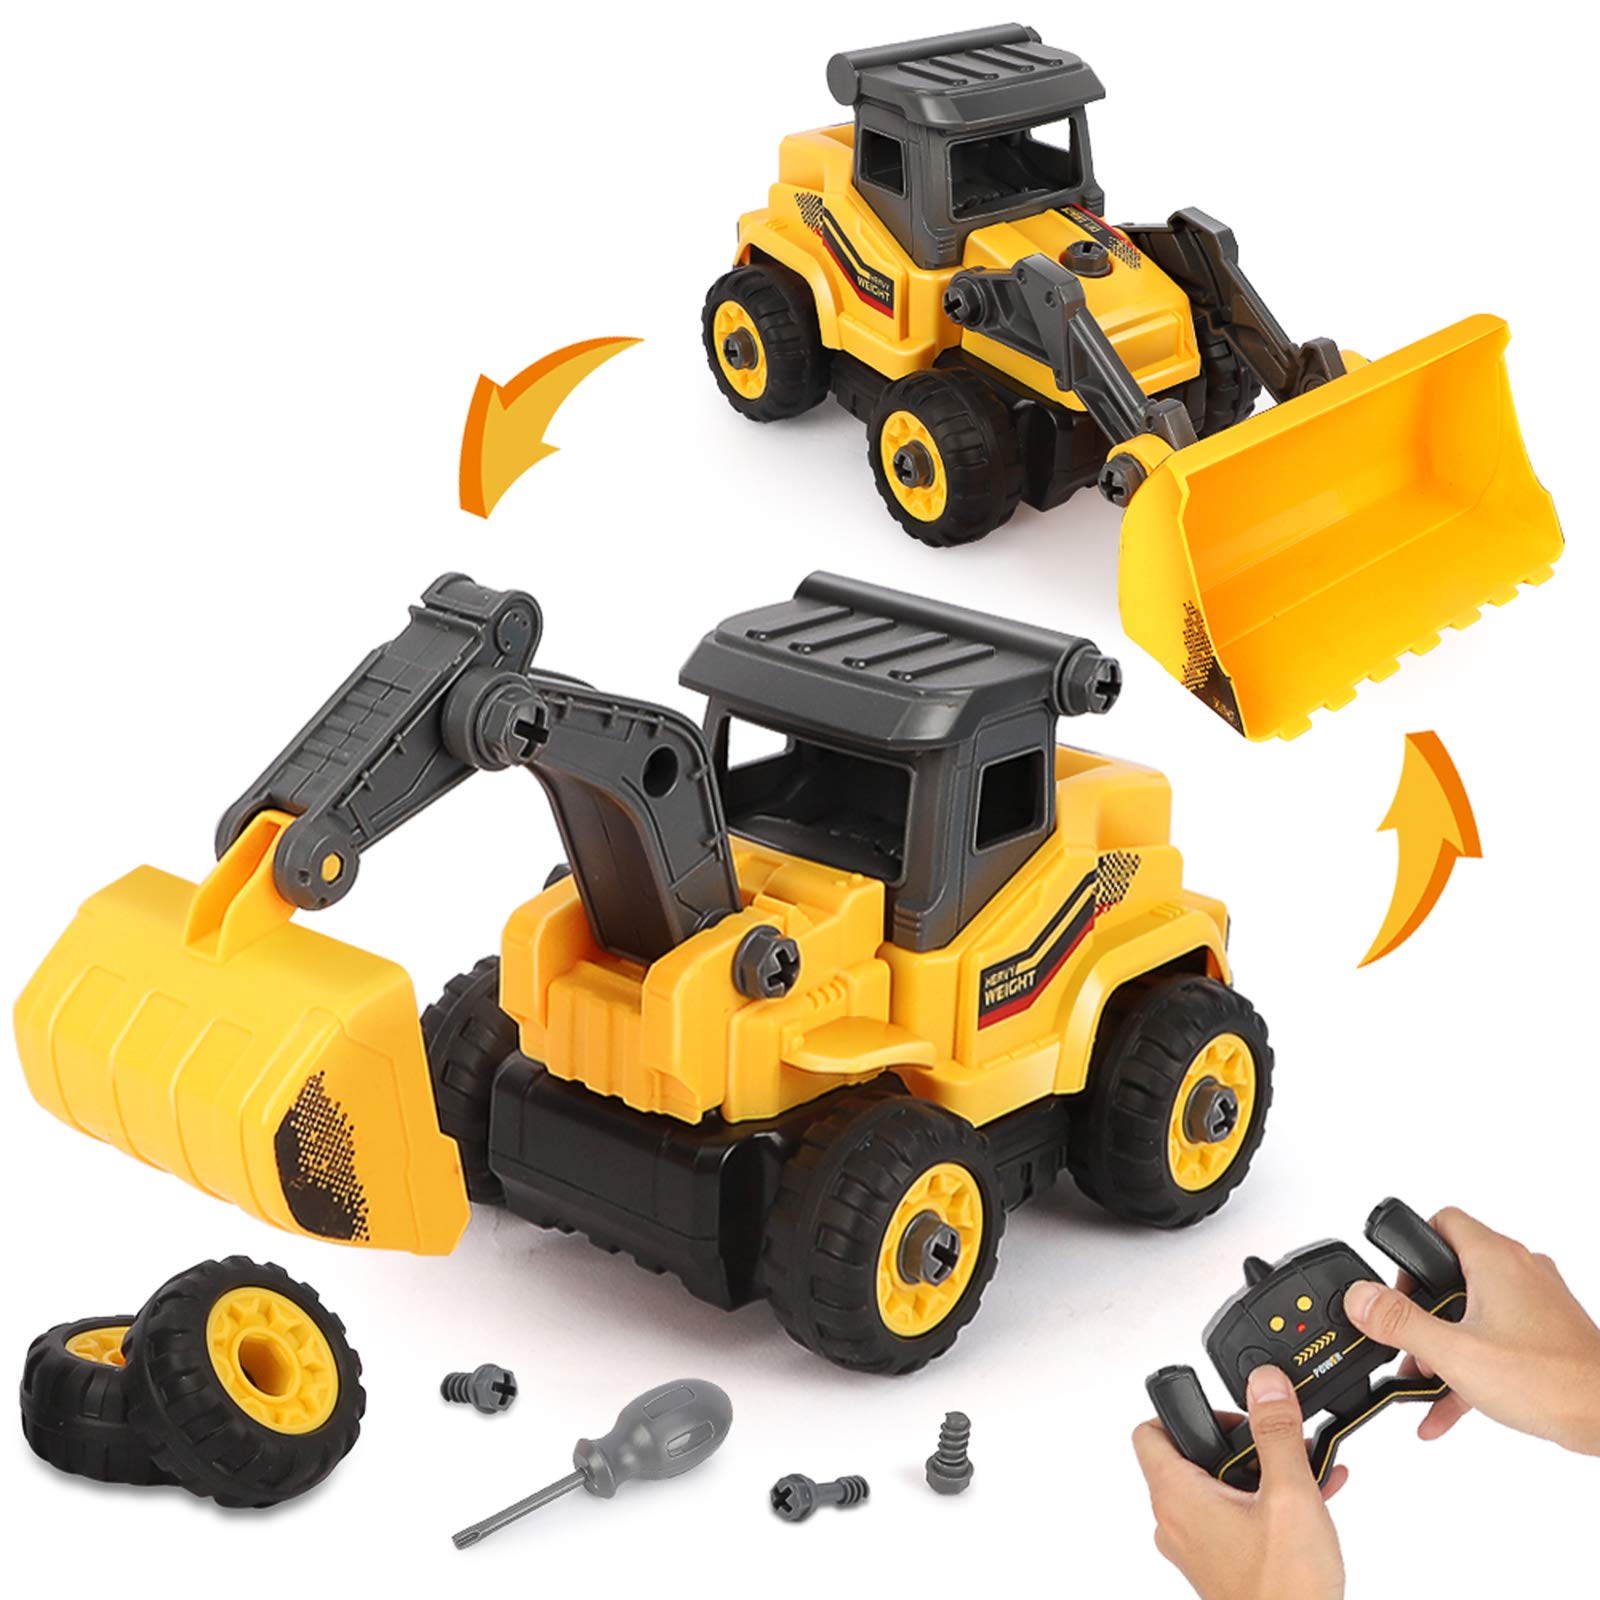 Well-designed Wooden Toy Guitar - BeebeeRun Take Apart Construction Toys – Construction Trucks for Boys – 2 in 1 RC Construction Vehicles – Remote Control Excavator and Bulldozer...